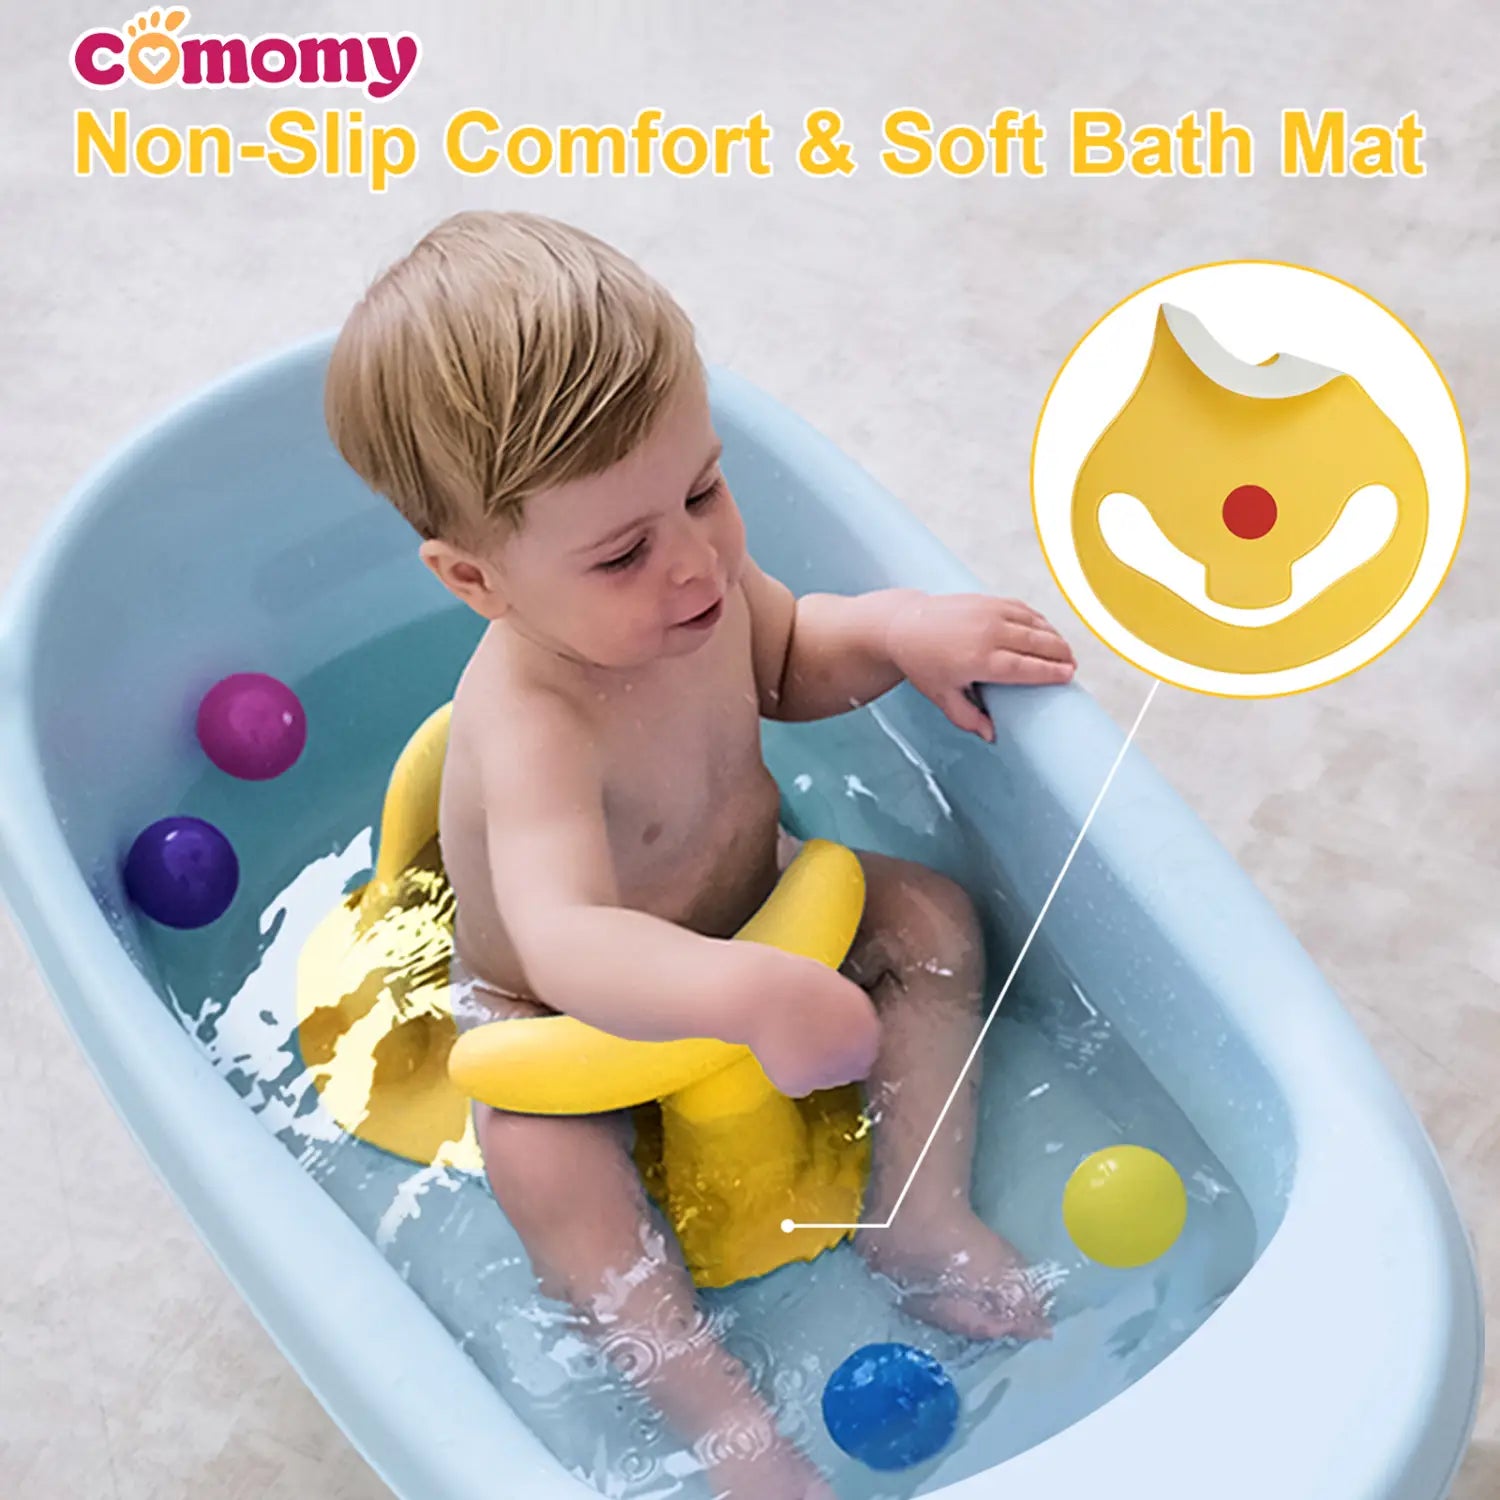 Infant Bath Seat Non-toxic Tpr Material Hands-free Support